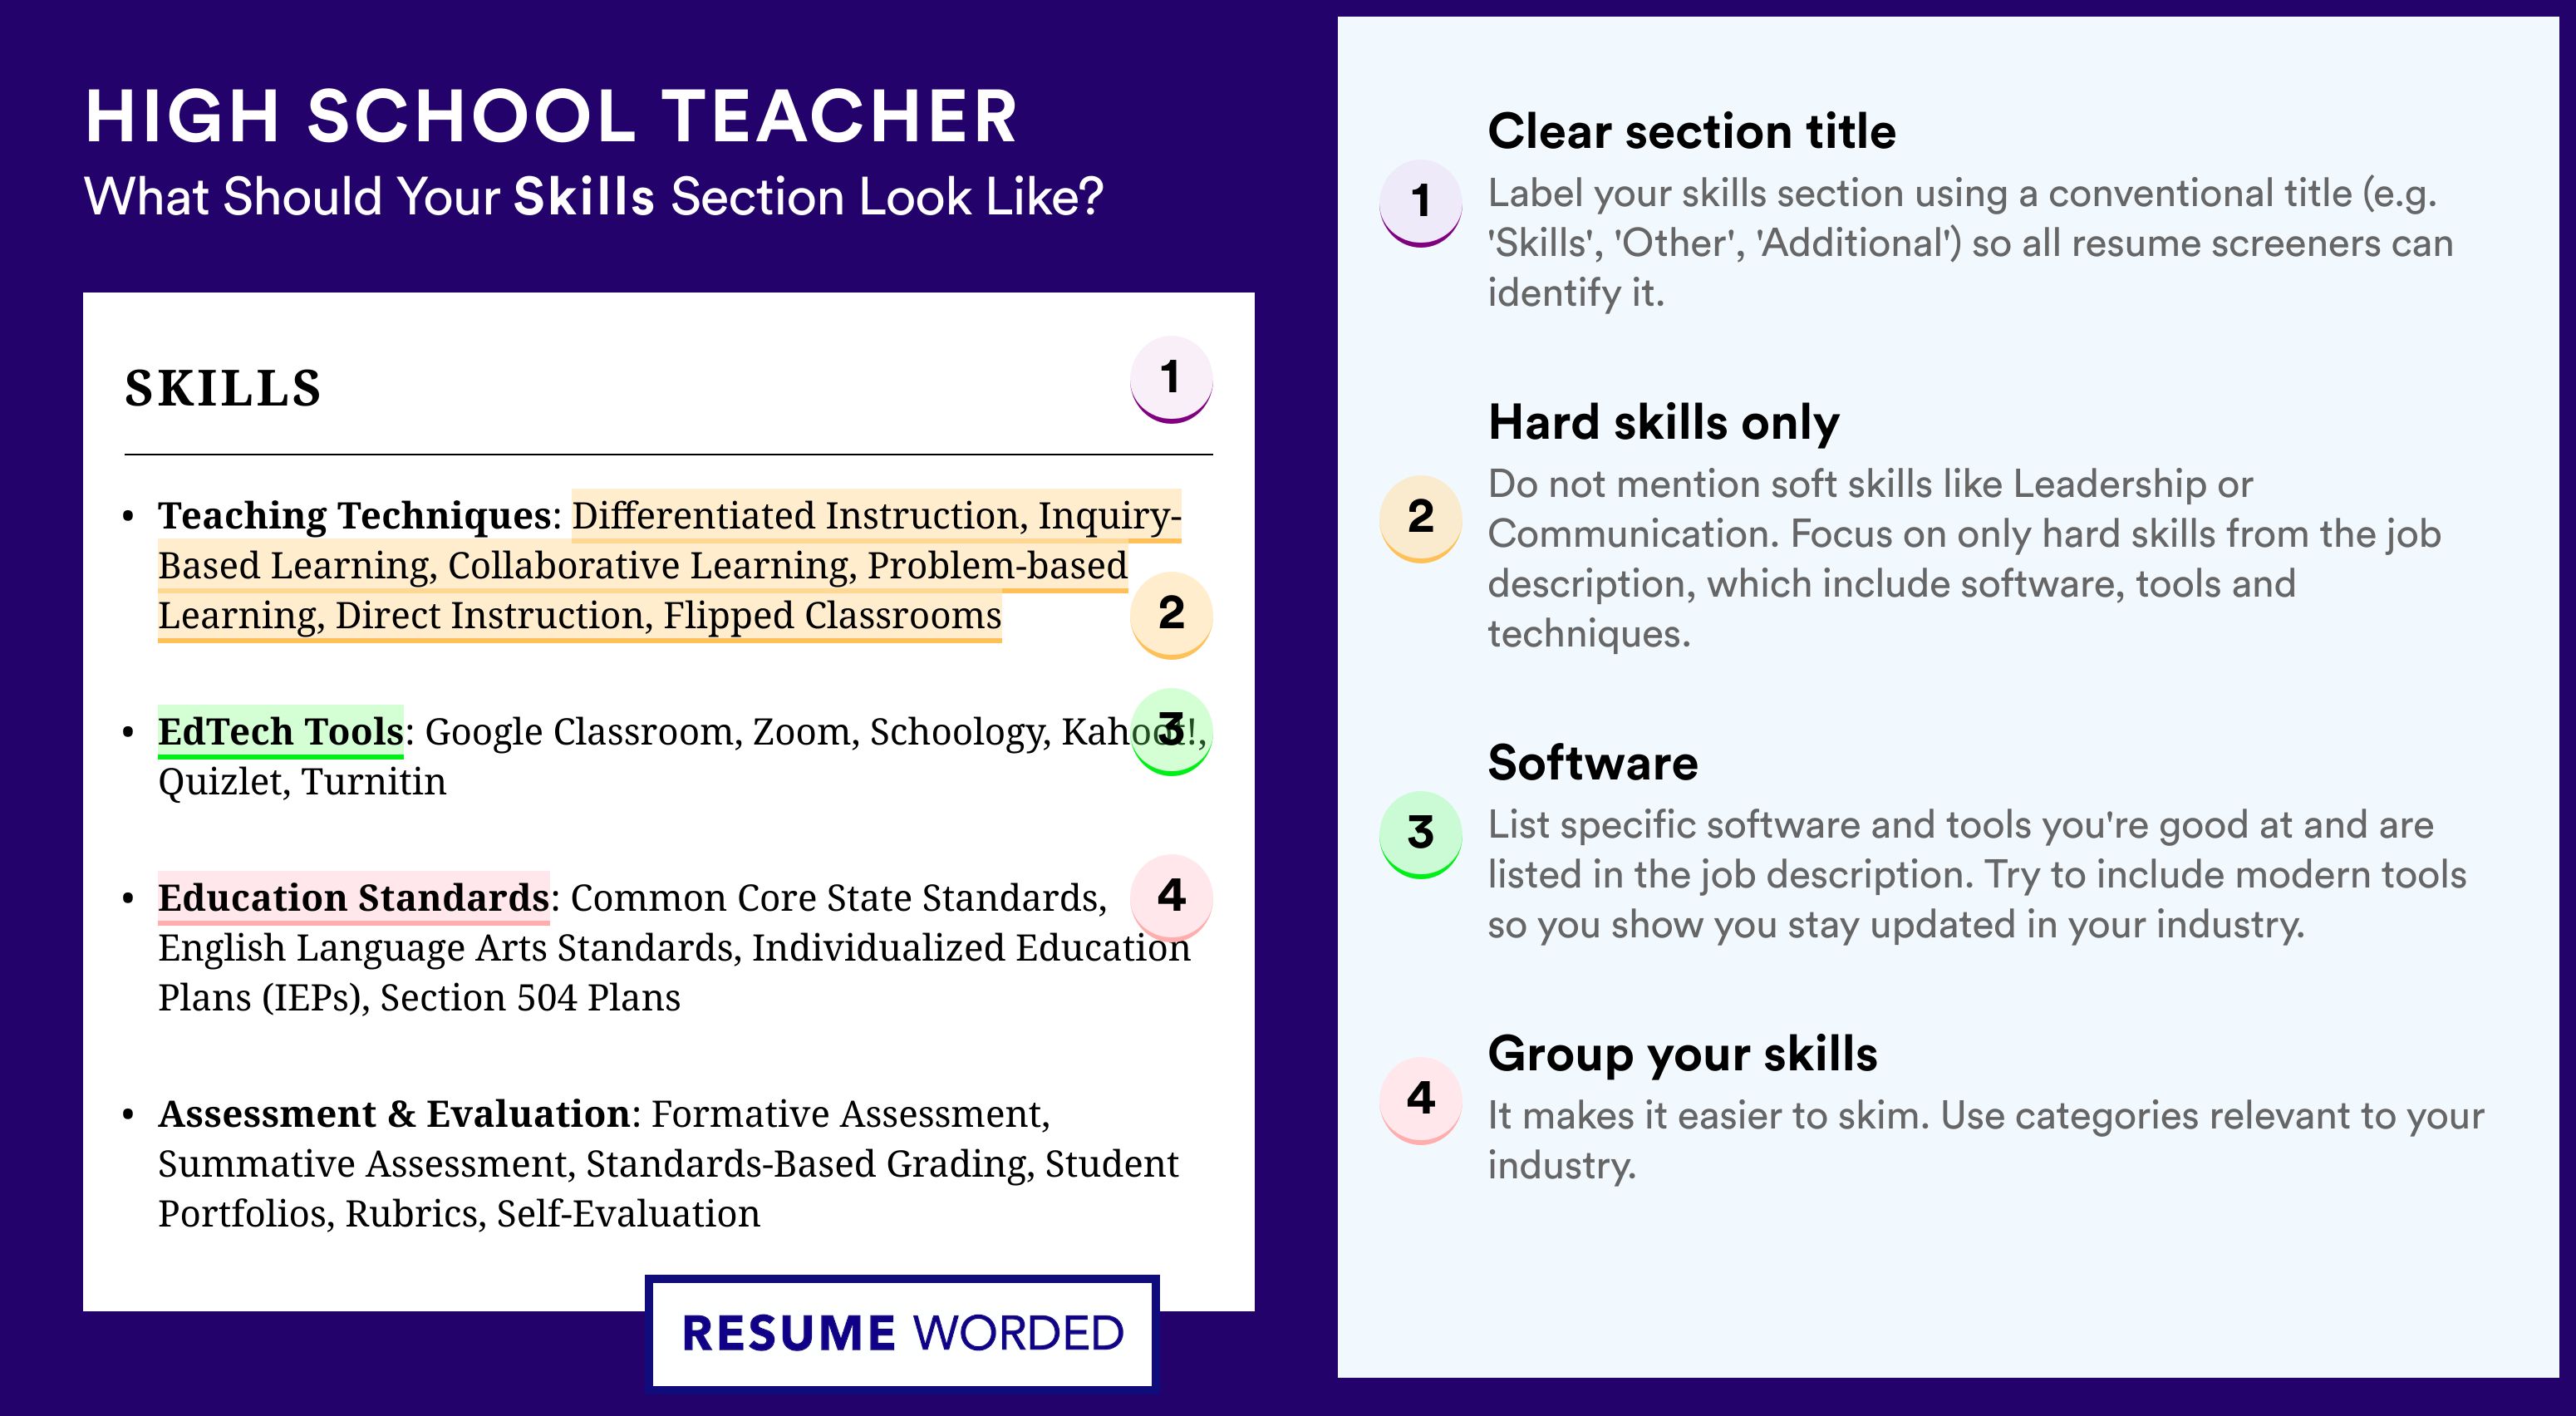 How To Write Your Skills Section - High School Teacher Roles